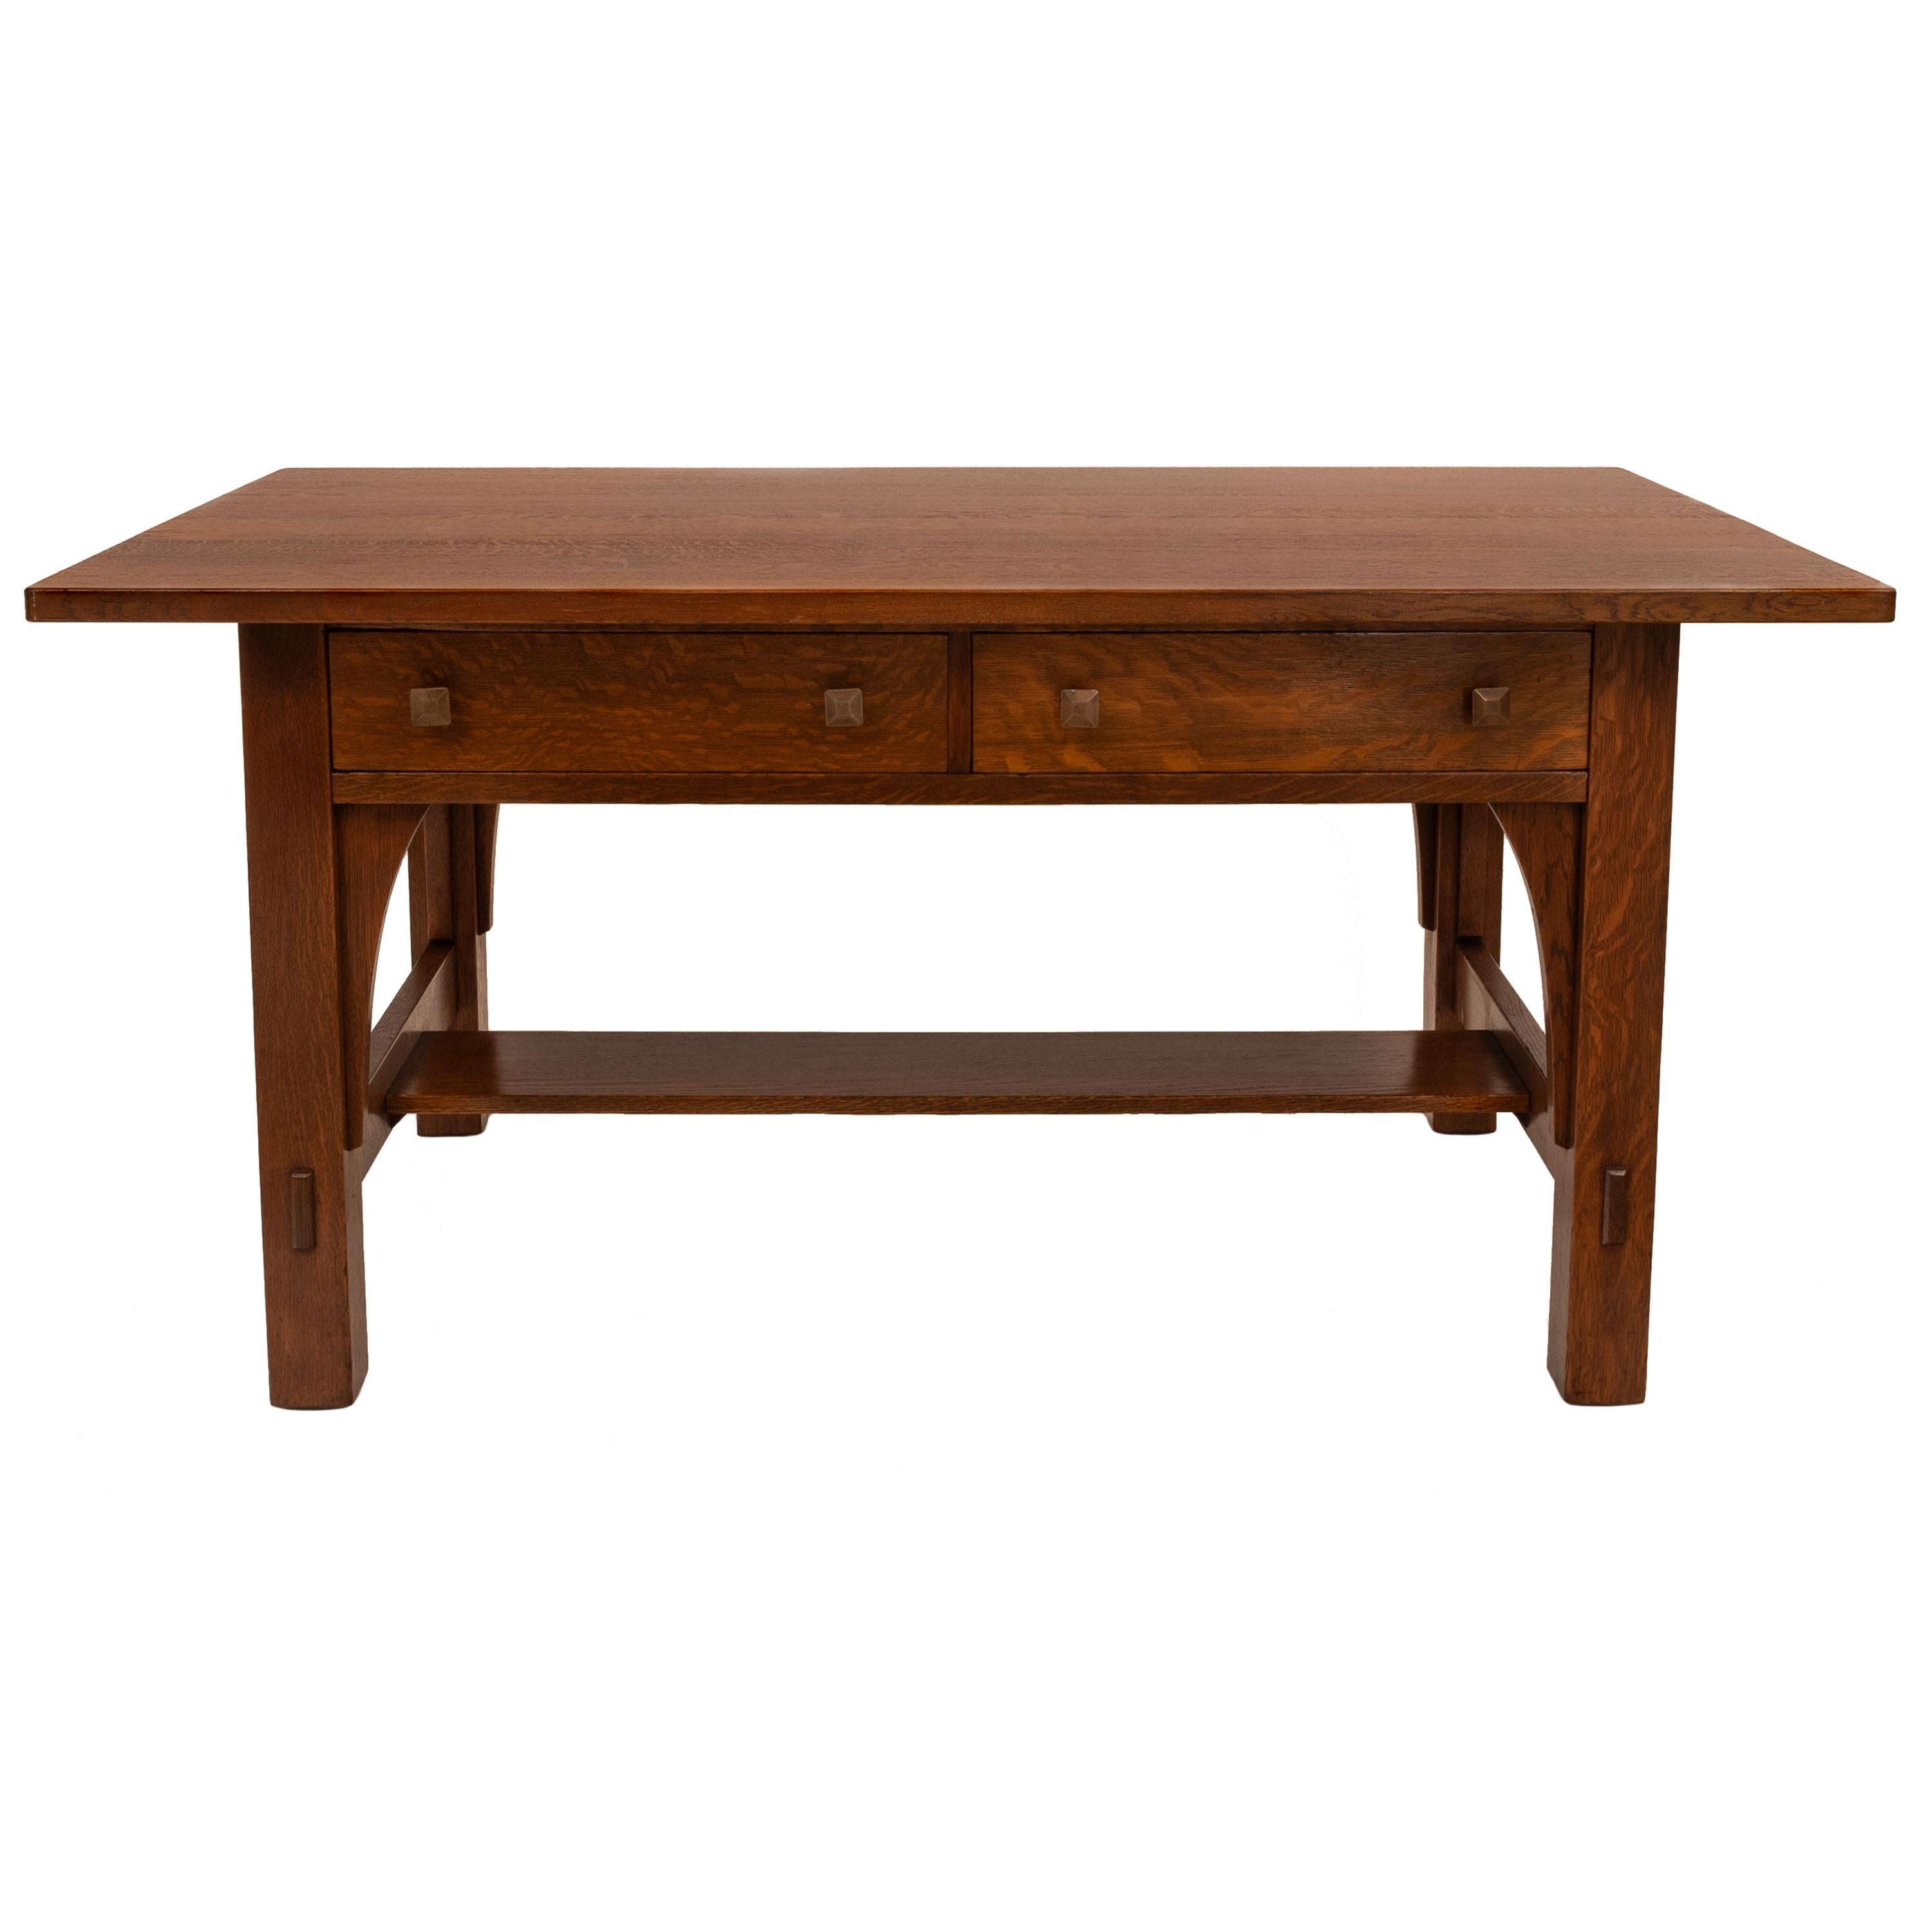 A very good antique American Arts & Crafts, Mission, solid quarter sawn oak library table desk, by Charles P Limbert, circa 1900.
The desk having a overhanging top with twin drawers below, the table raised on four legs with subtle arched supports